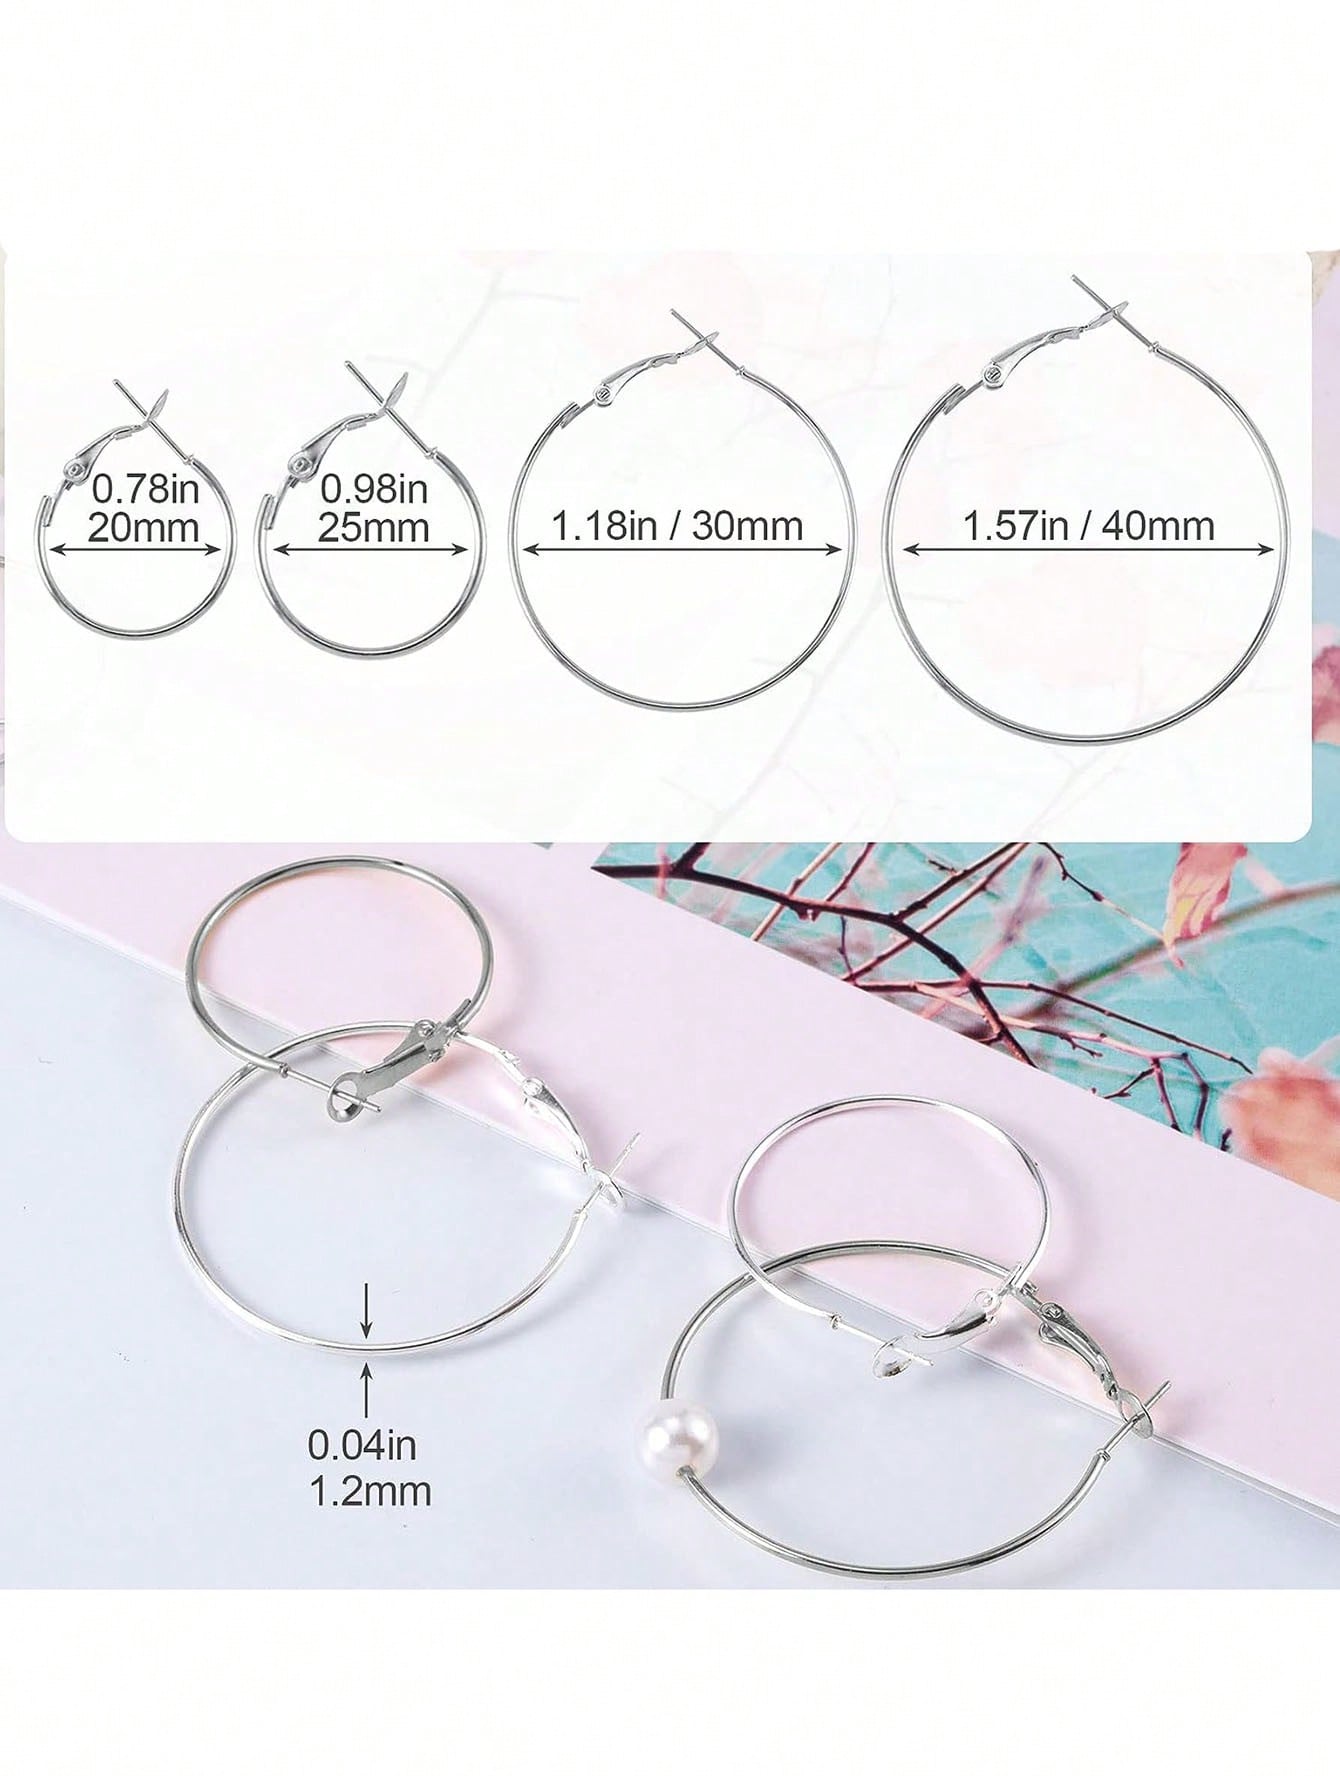 Alloy Circle Shaped Earring Hoops For DIY Jewelry Making, 32 pc Allergy-free 💜